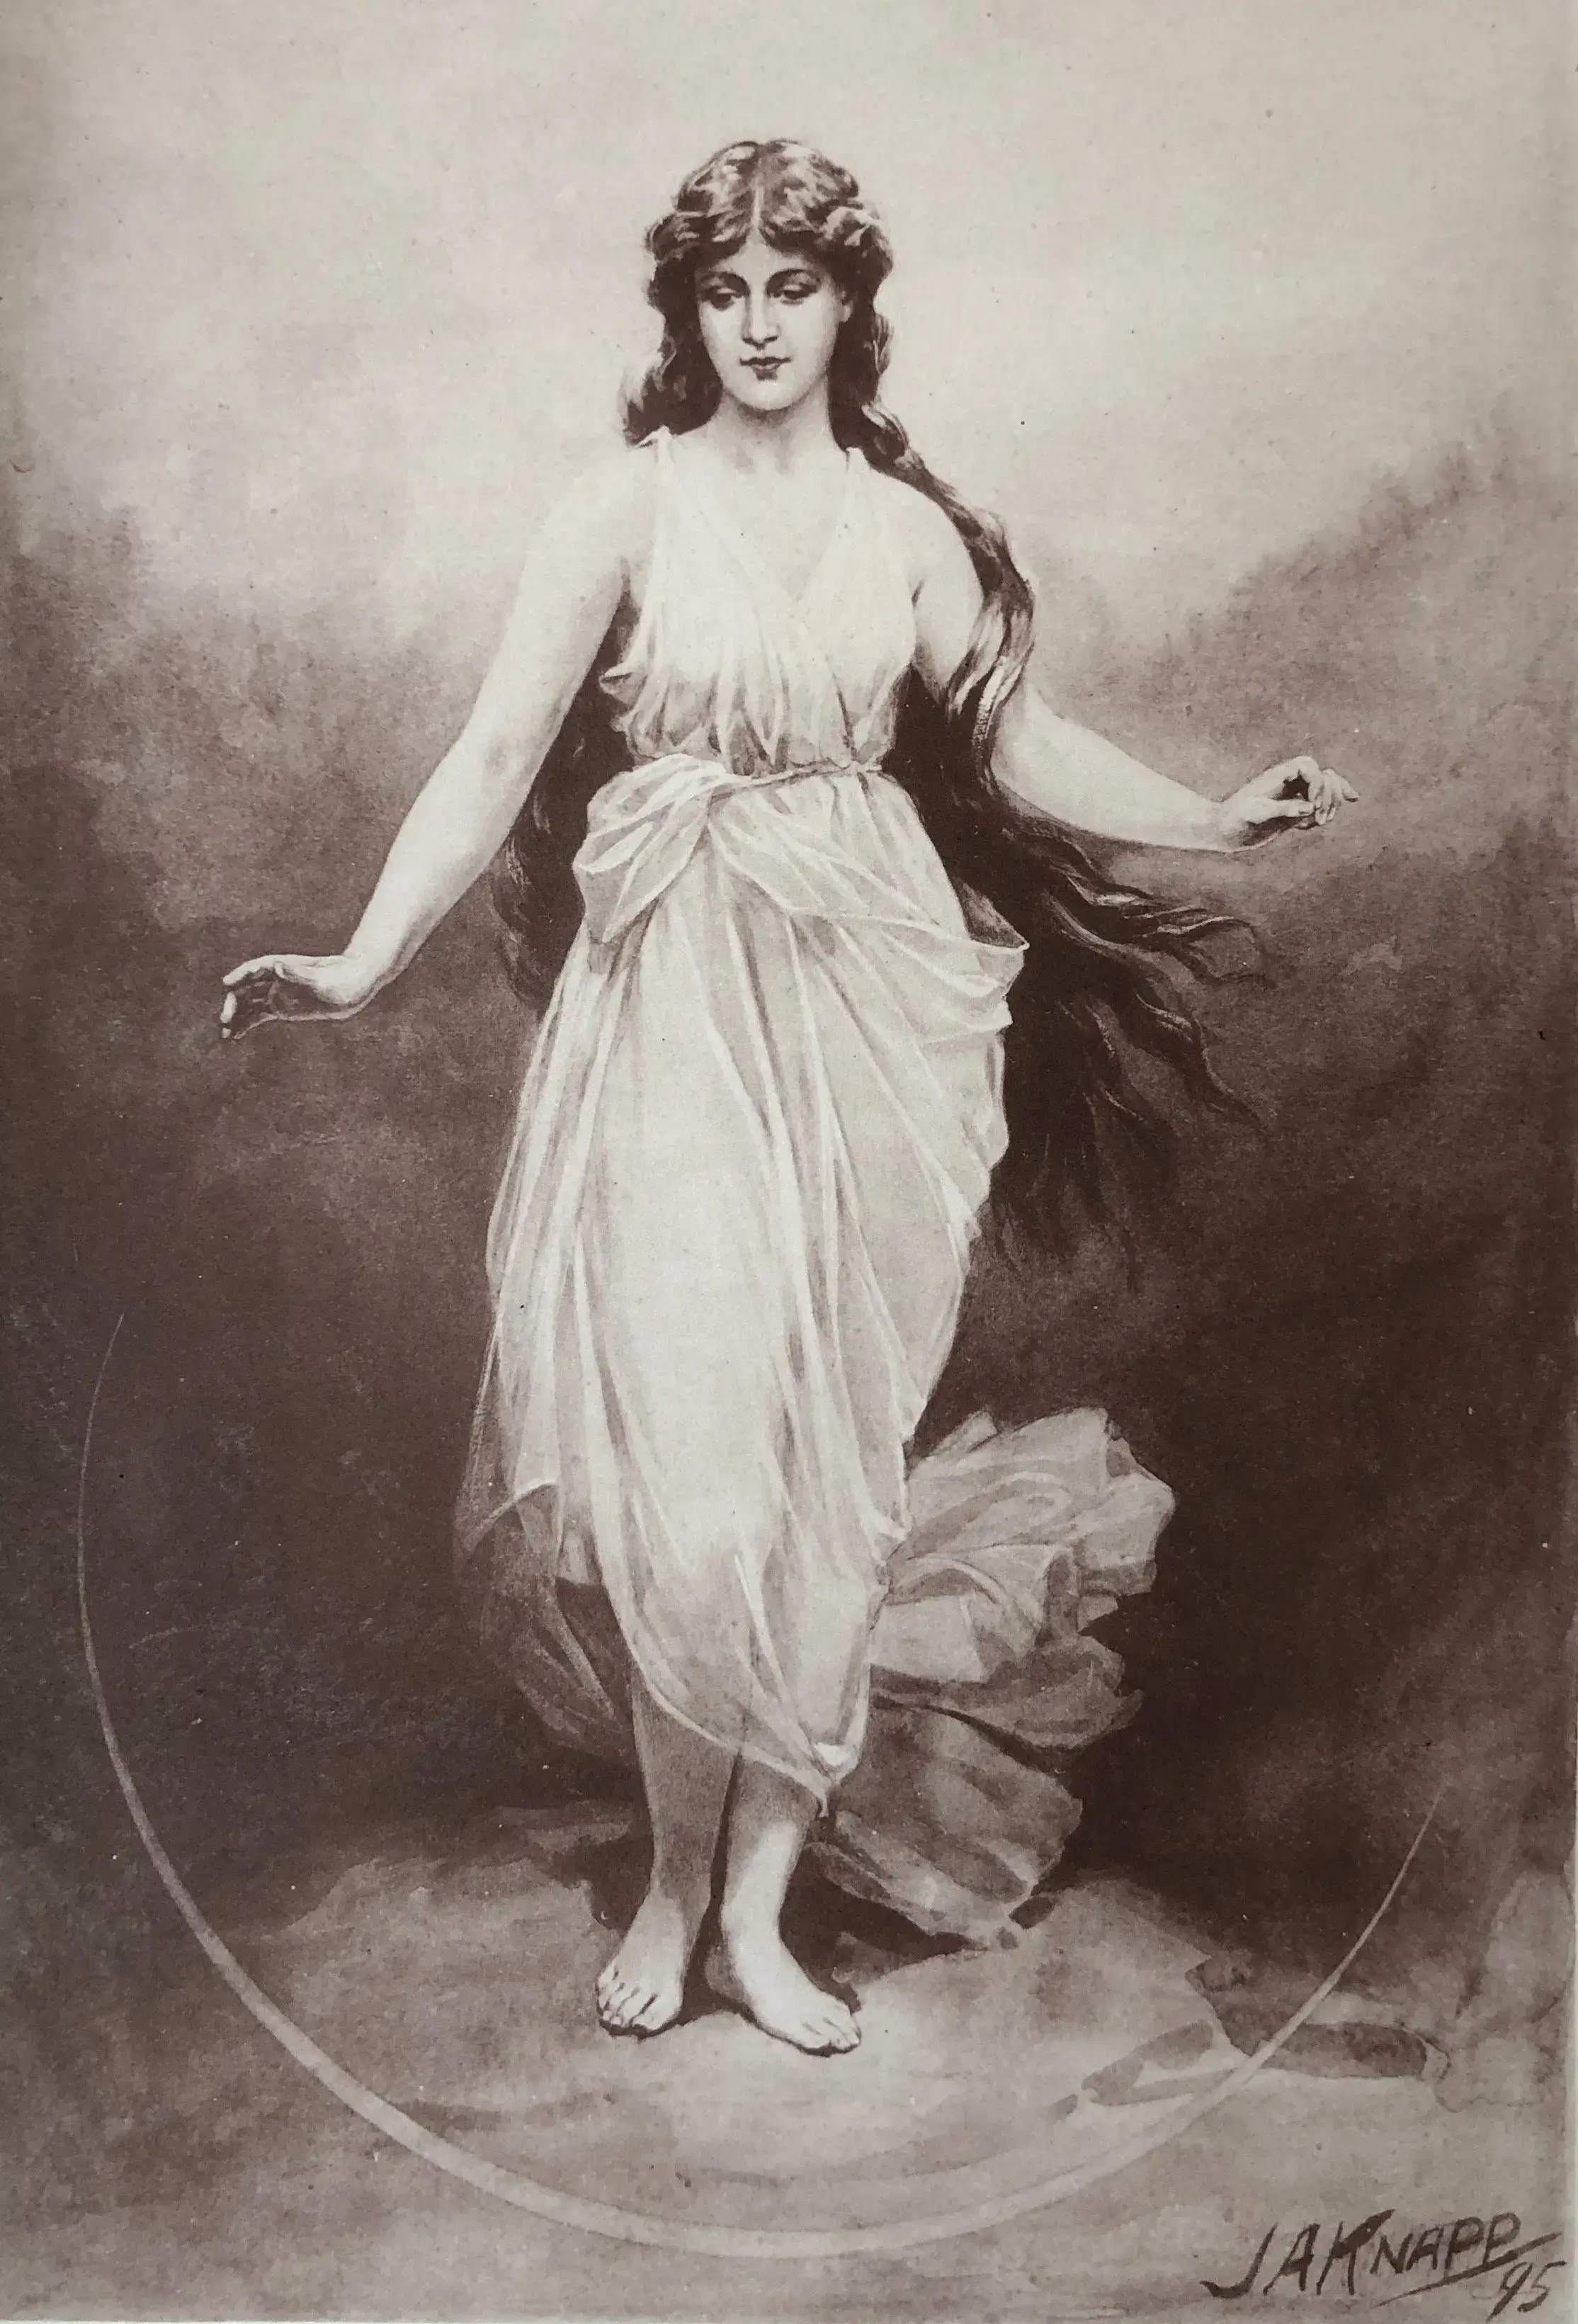 Etidorhpa as drawn in the first edition, a full-size portrait of a woman in a flowing gown